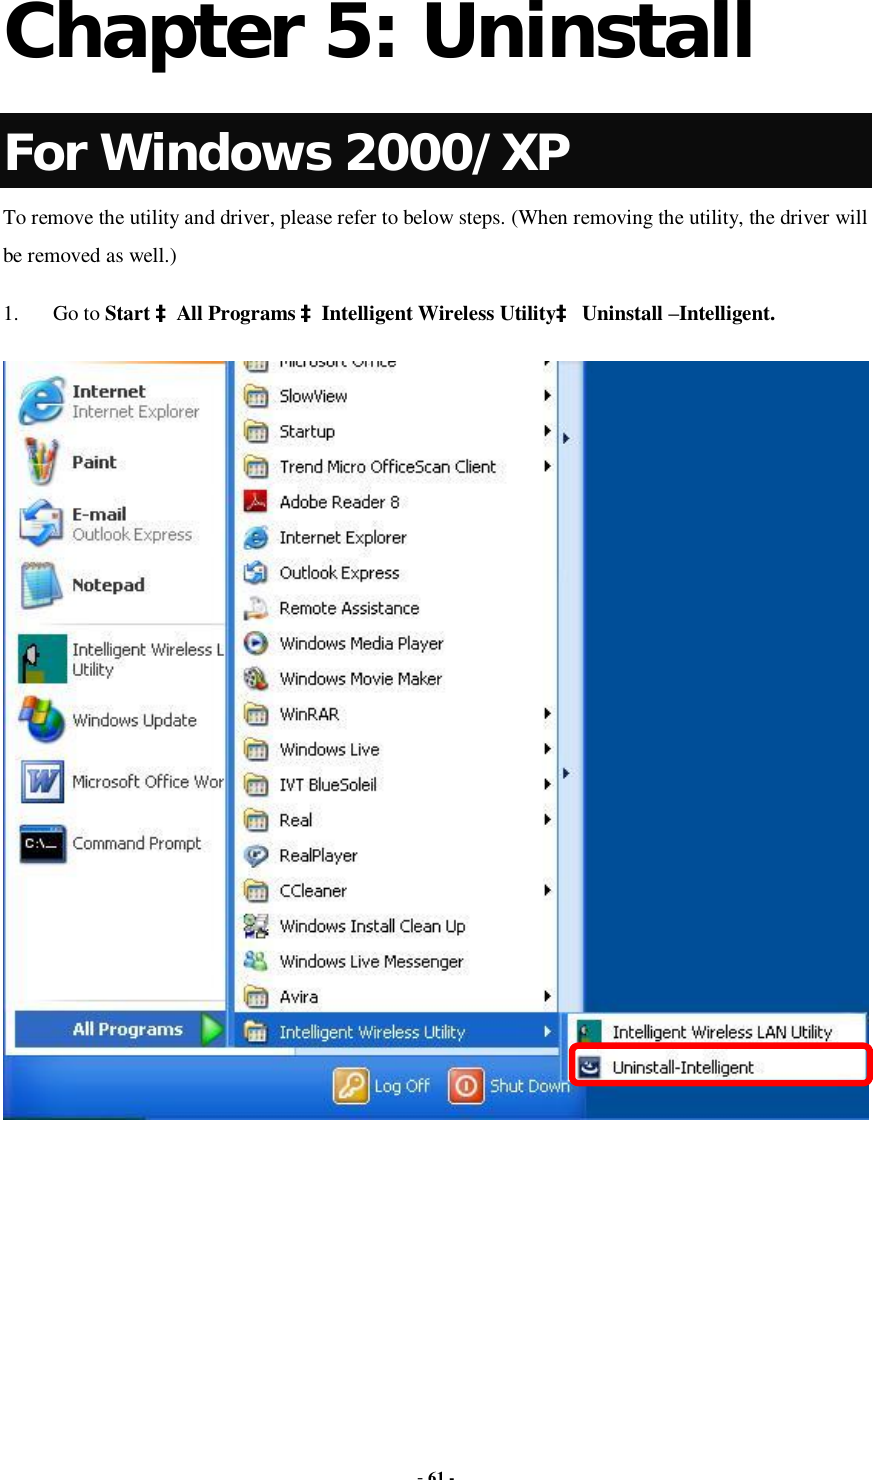  - 61 -  Chapter 5: Uninstall For Windows 2000/XP To remove the utility and driver, please refer to below steps. (When removing the utility, the driver will be removed as well.) 1. Go to Start àAll Programs àIntelligent Wireless Utilityà Uninstall –Intelligent.  